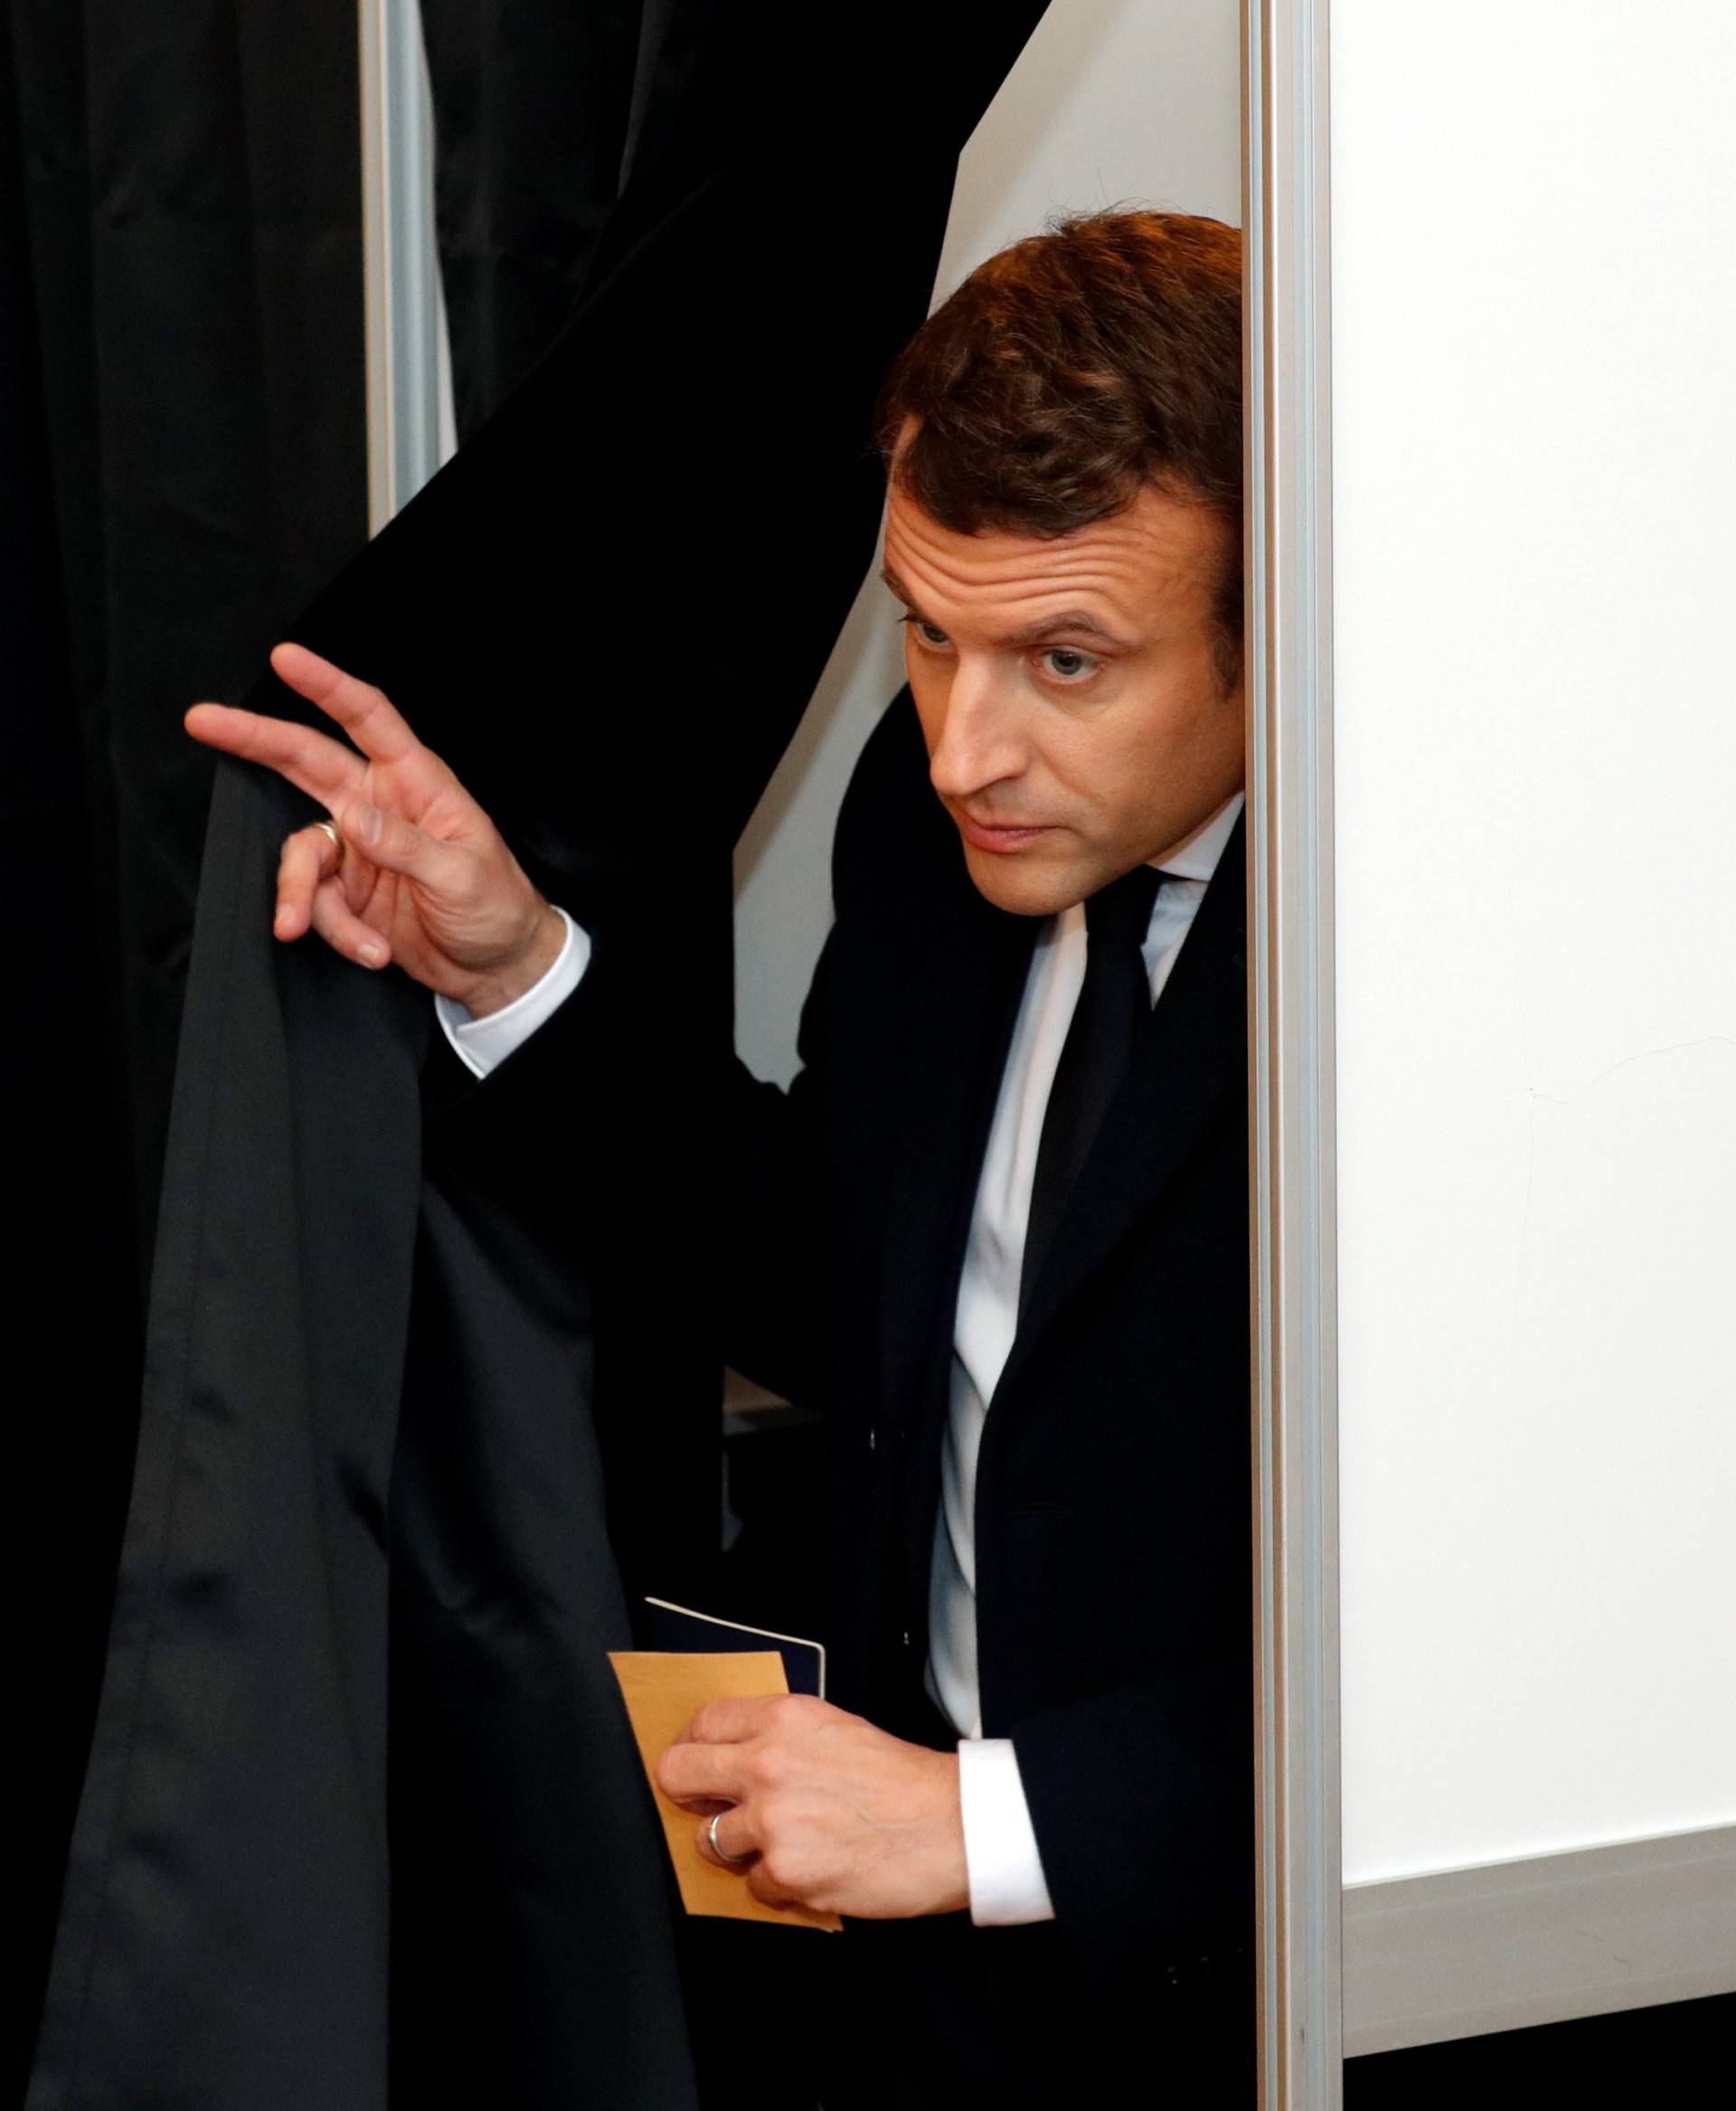 French presidential election candidate Emmanuel Macron at a polling station during the the second round of 2017 French presidential election, in Le Touquet